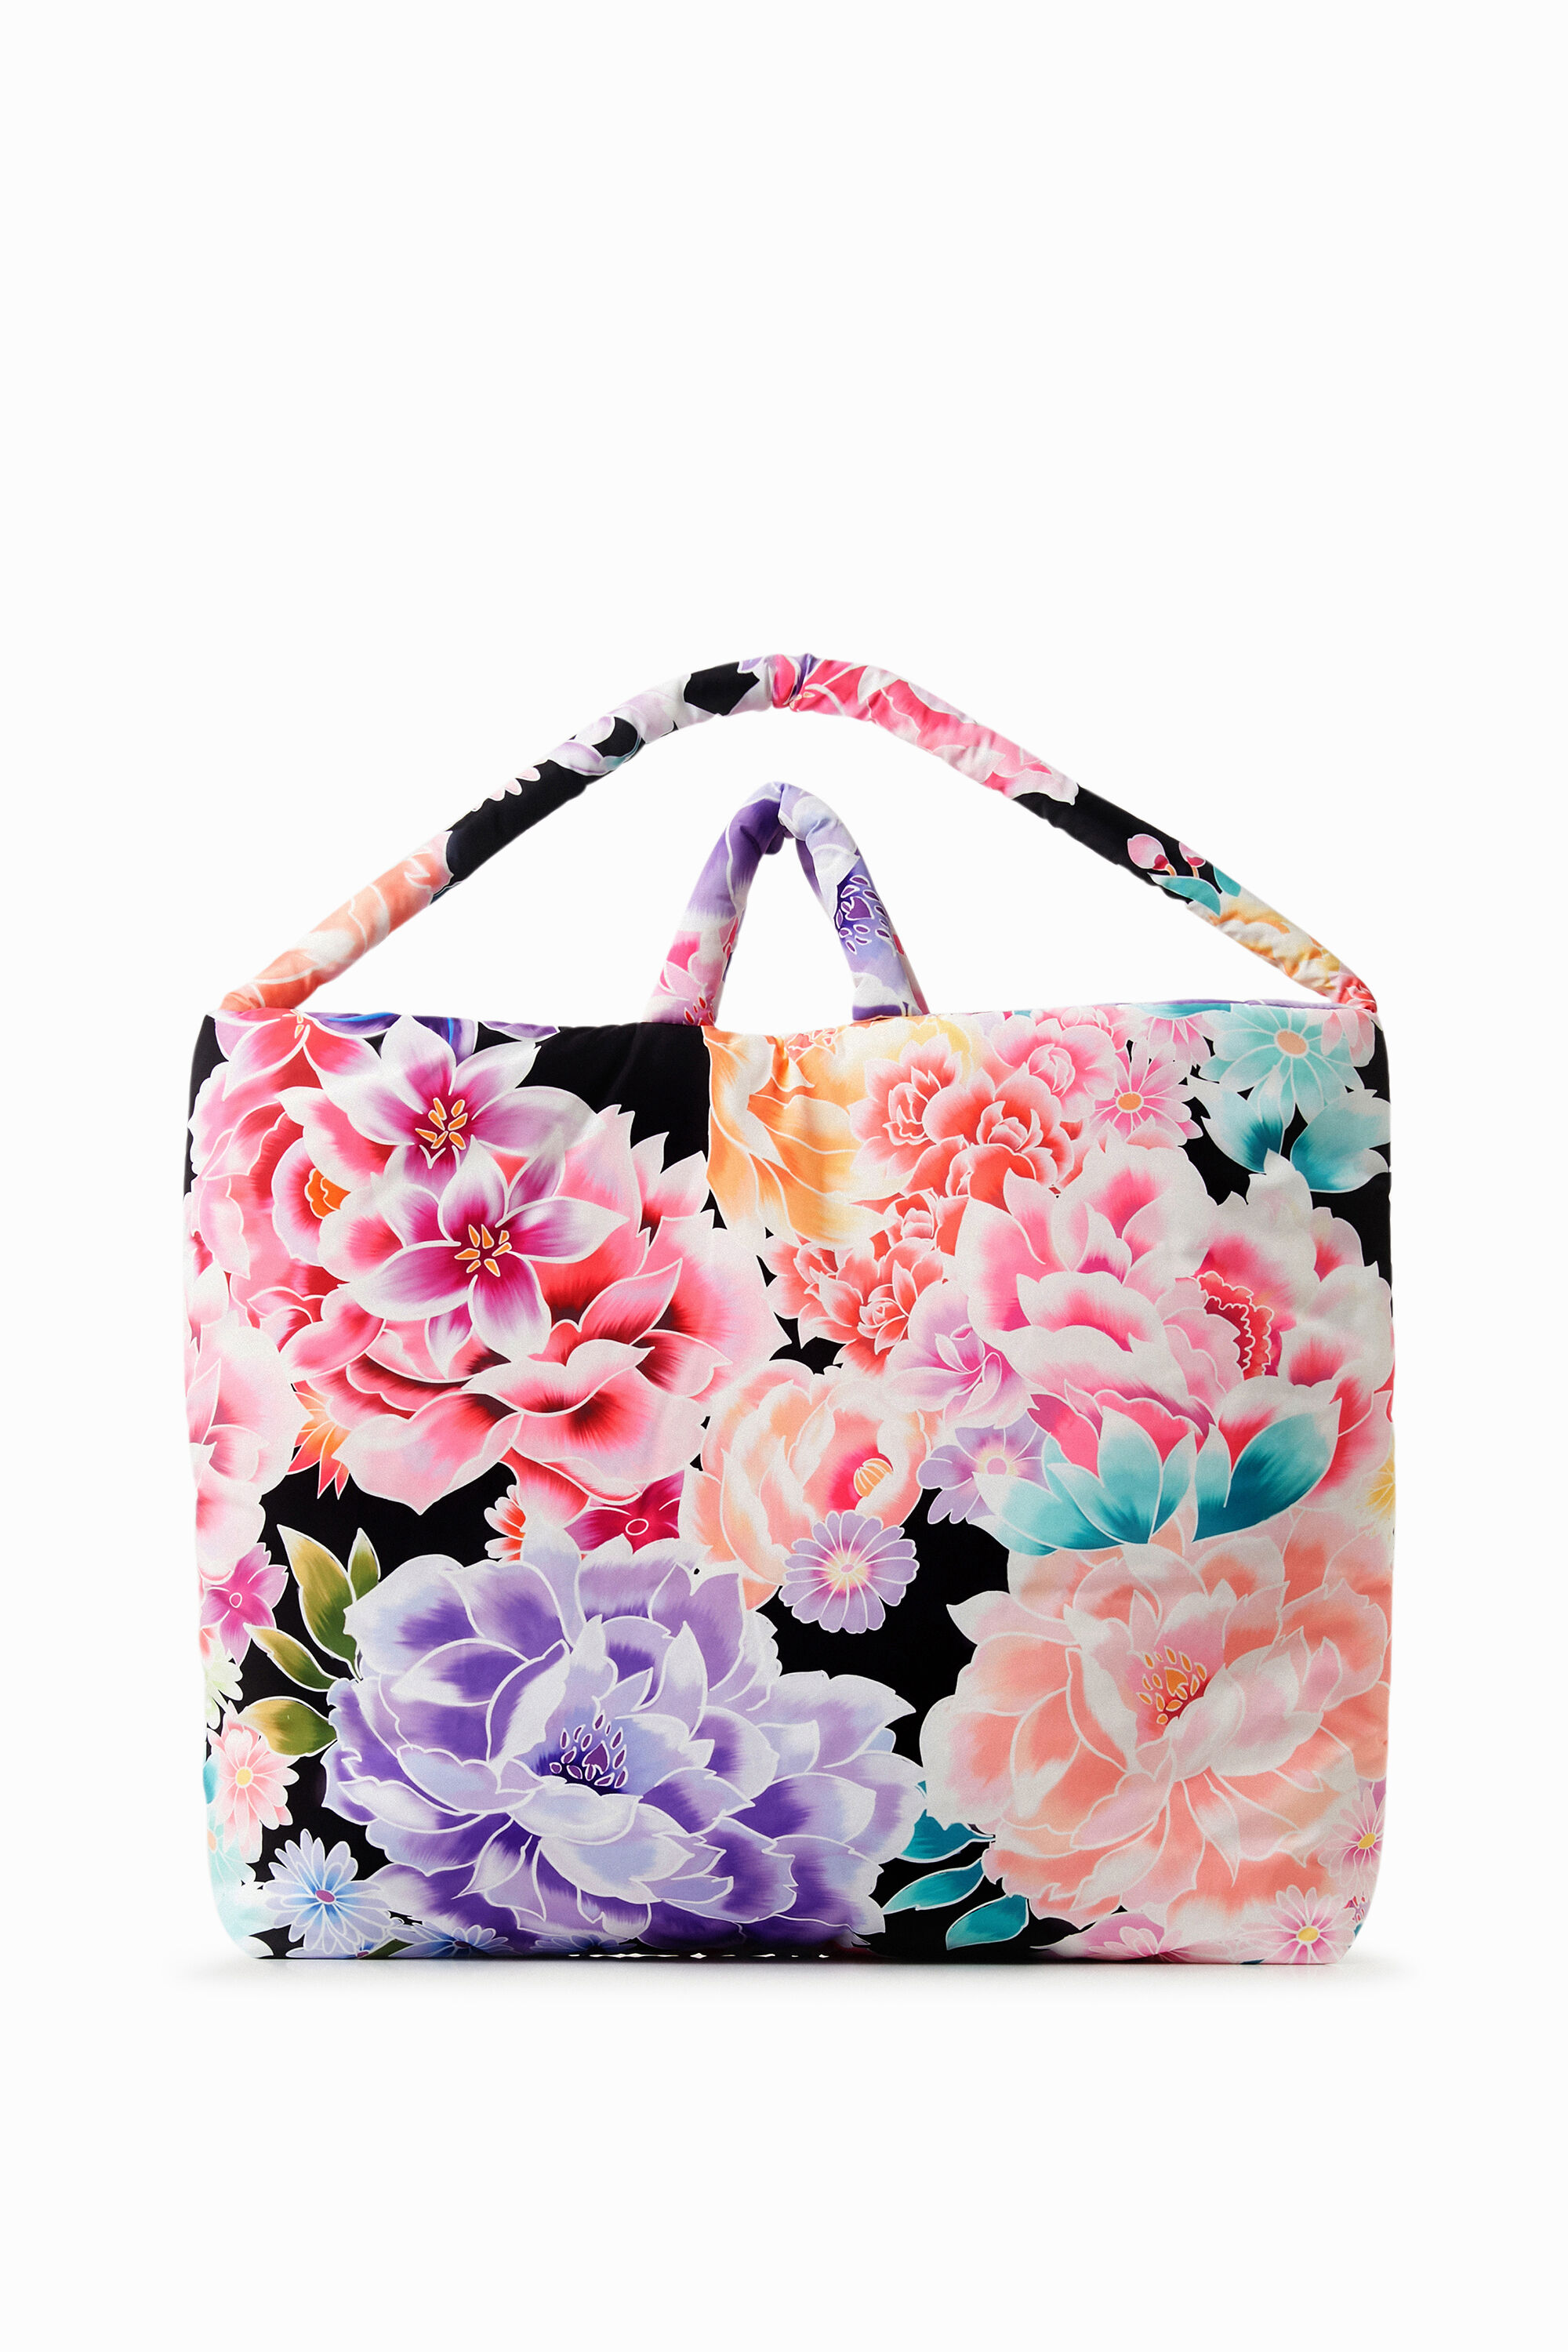 Desigual Floral Oversized Handbag In Material Finishes